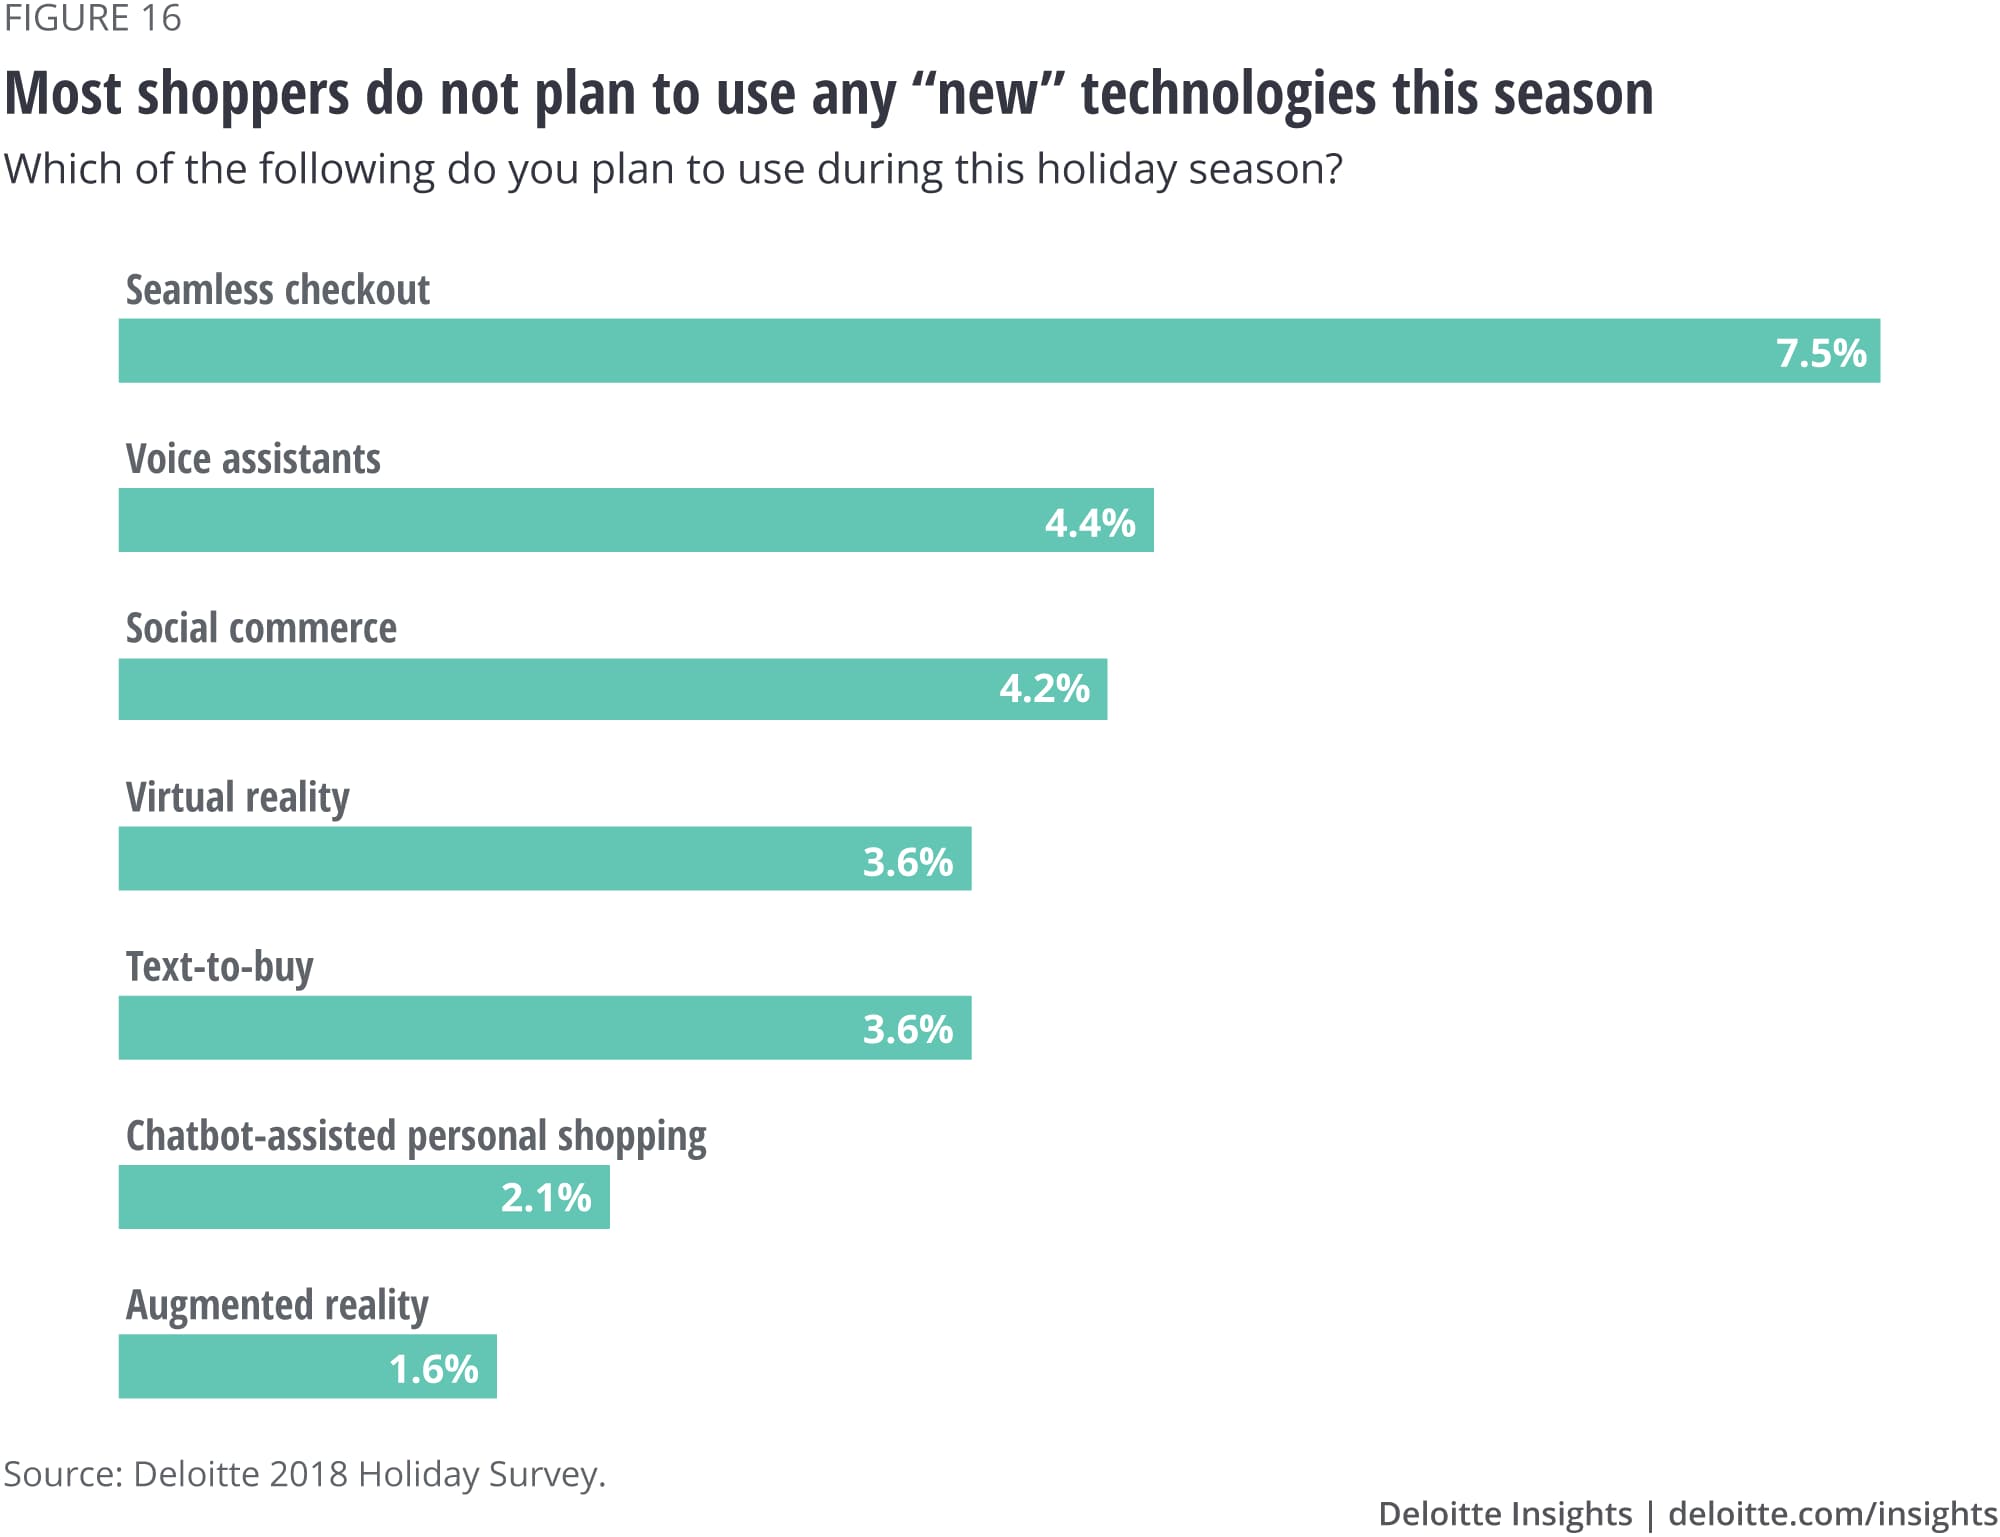 Most shoppers do not plan to use any “new” technologies this season